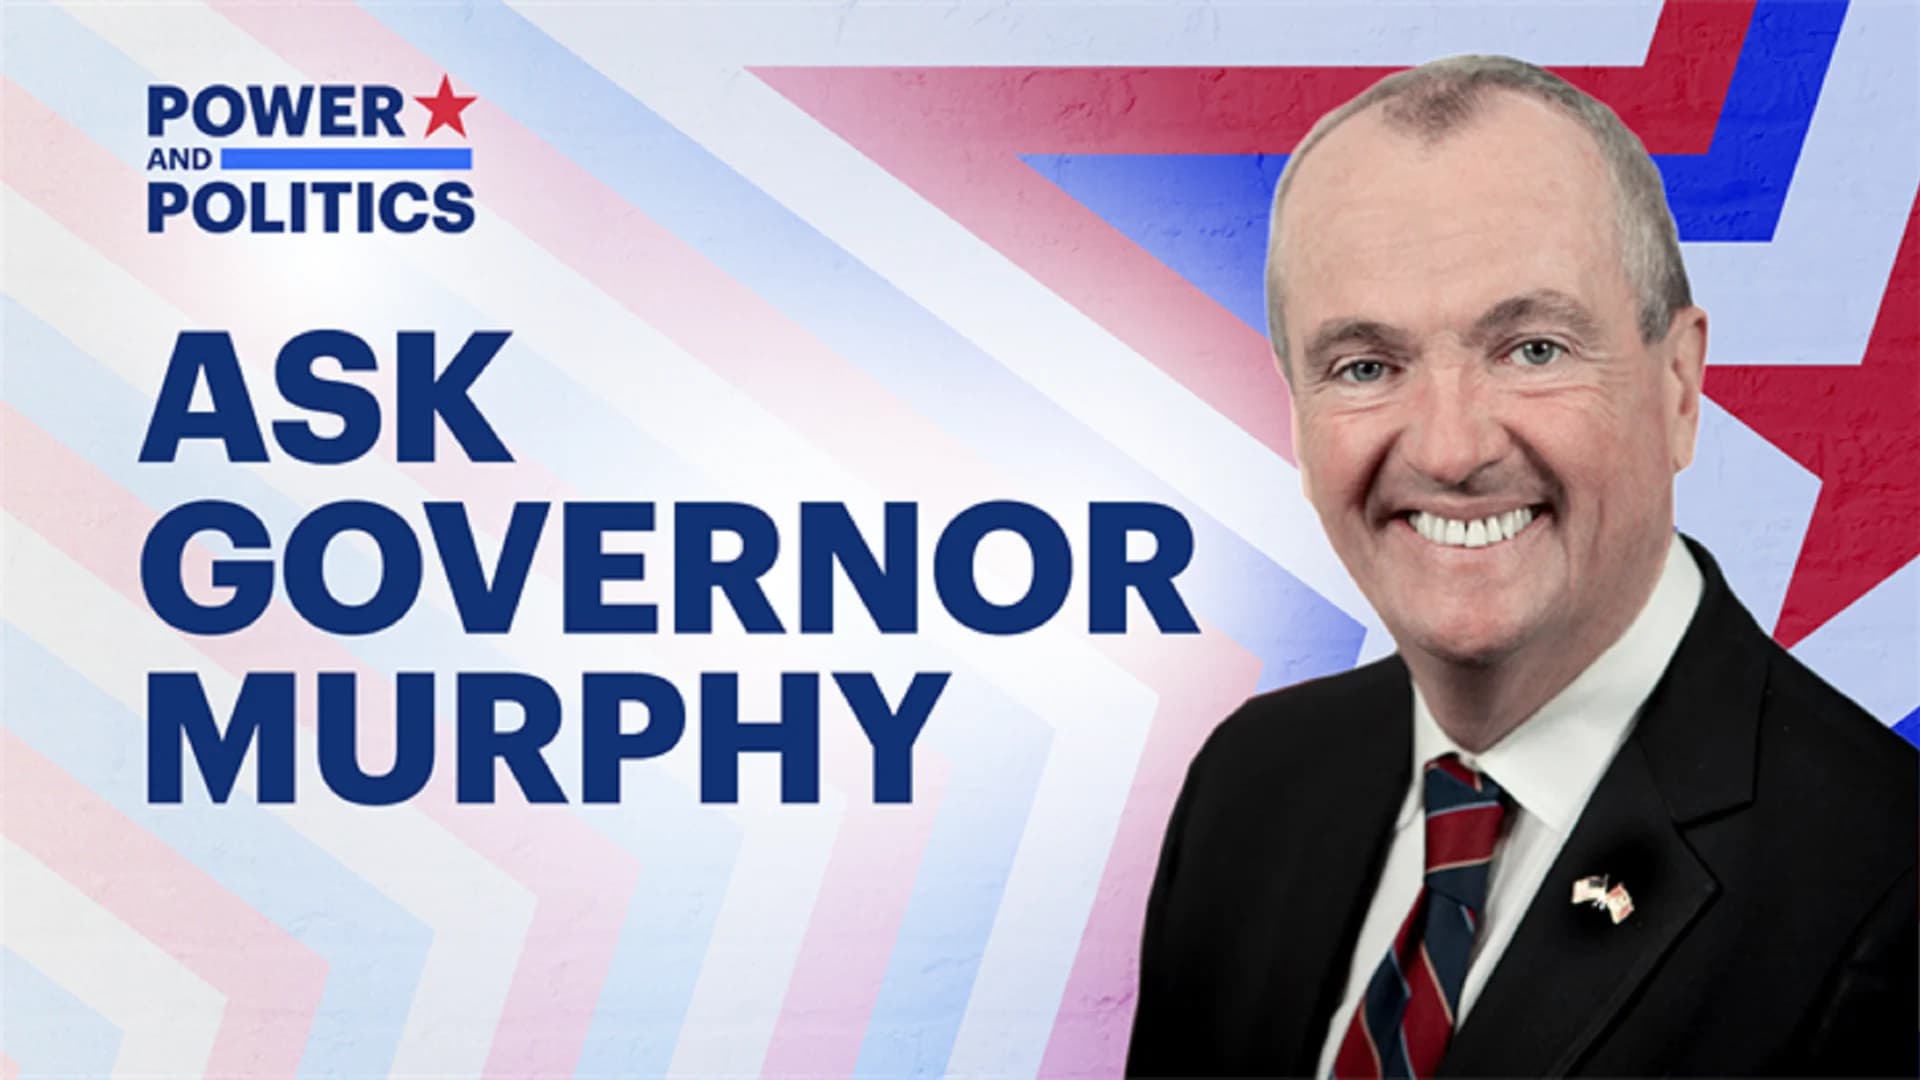 Ask Gov. Murphy - Full show from March 30, 2021